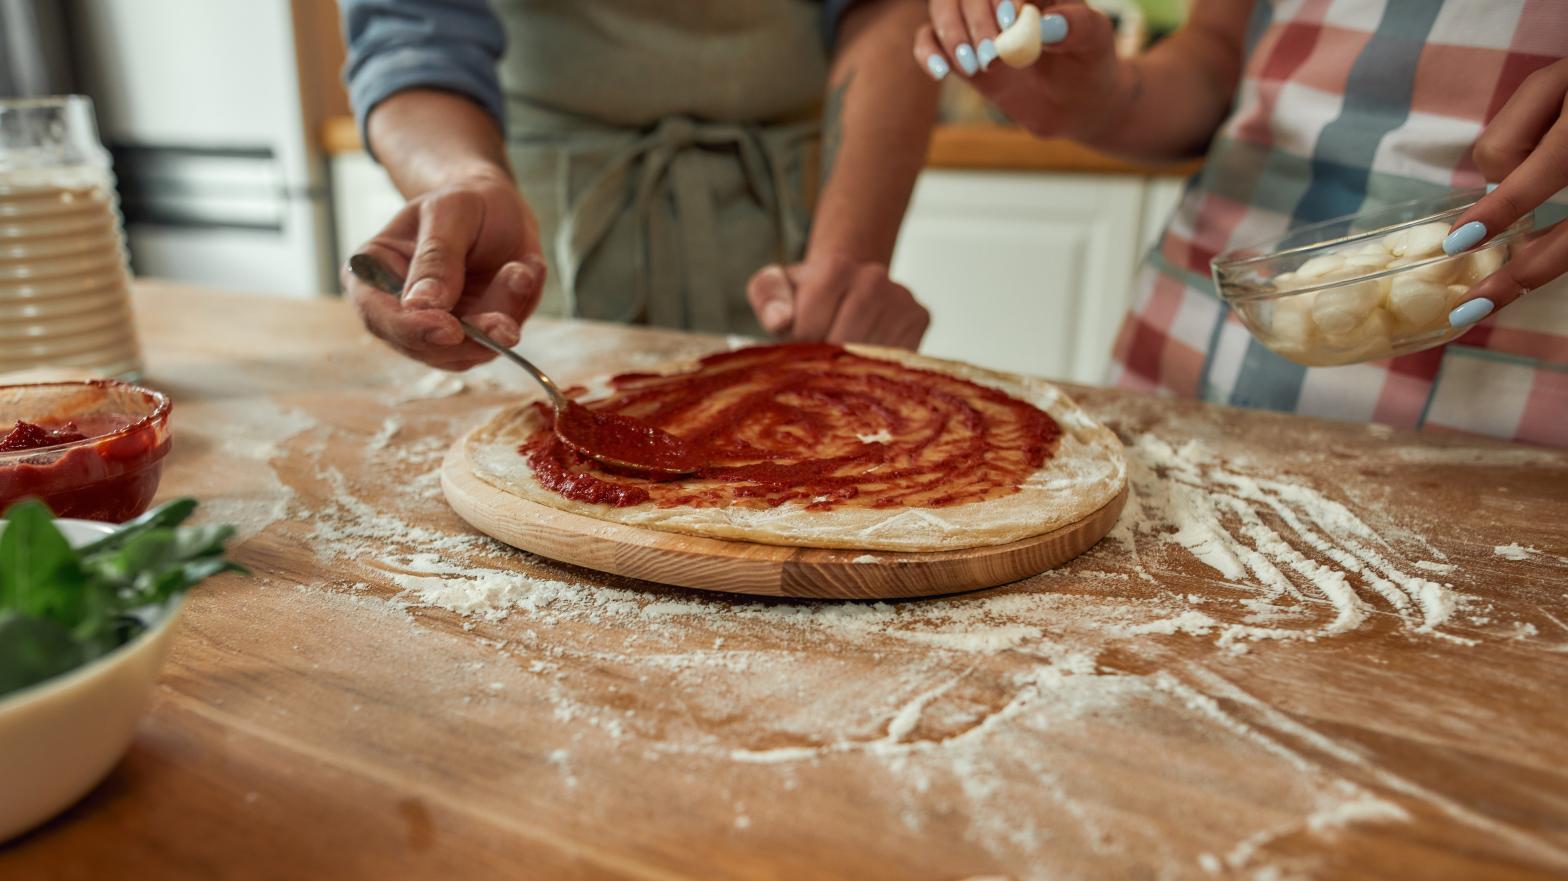 The Biggest Thing You’re Missing on Your Homemade Pizza